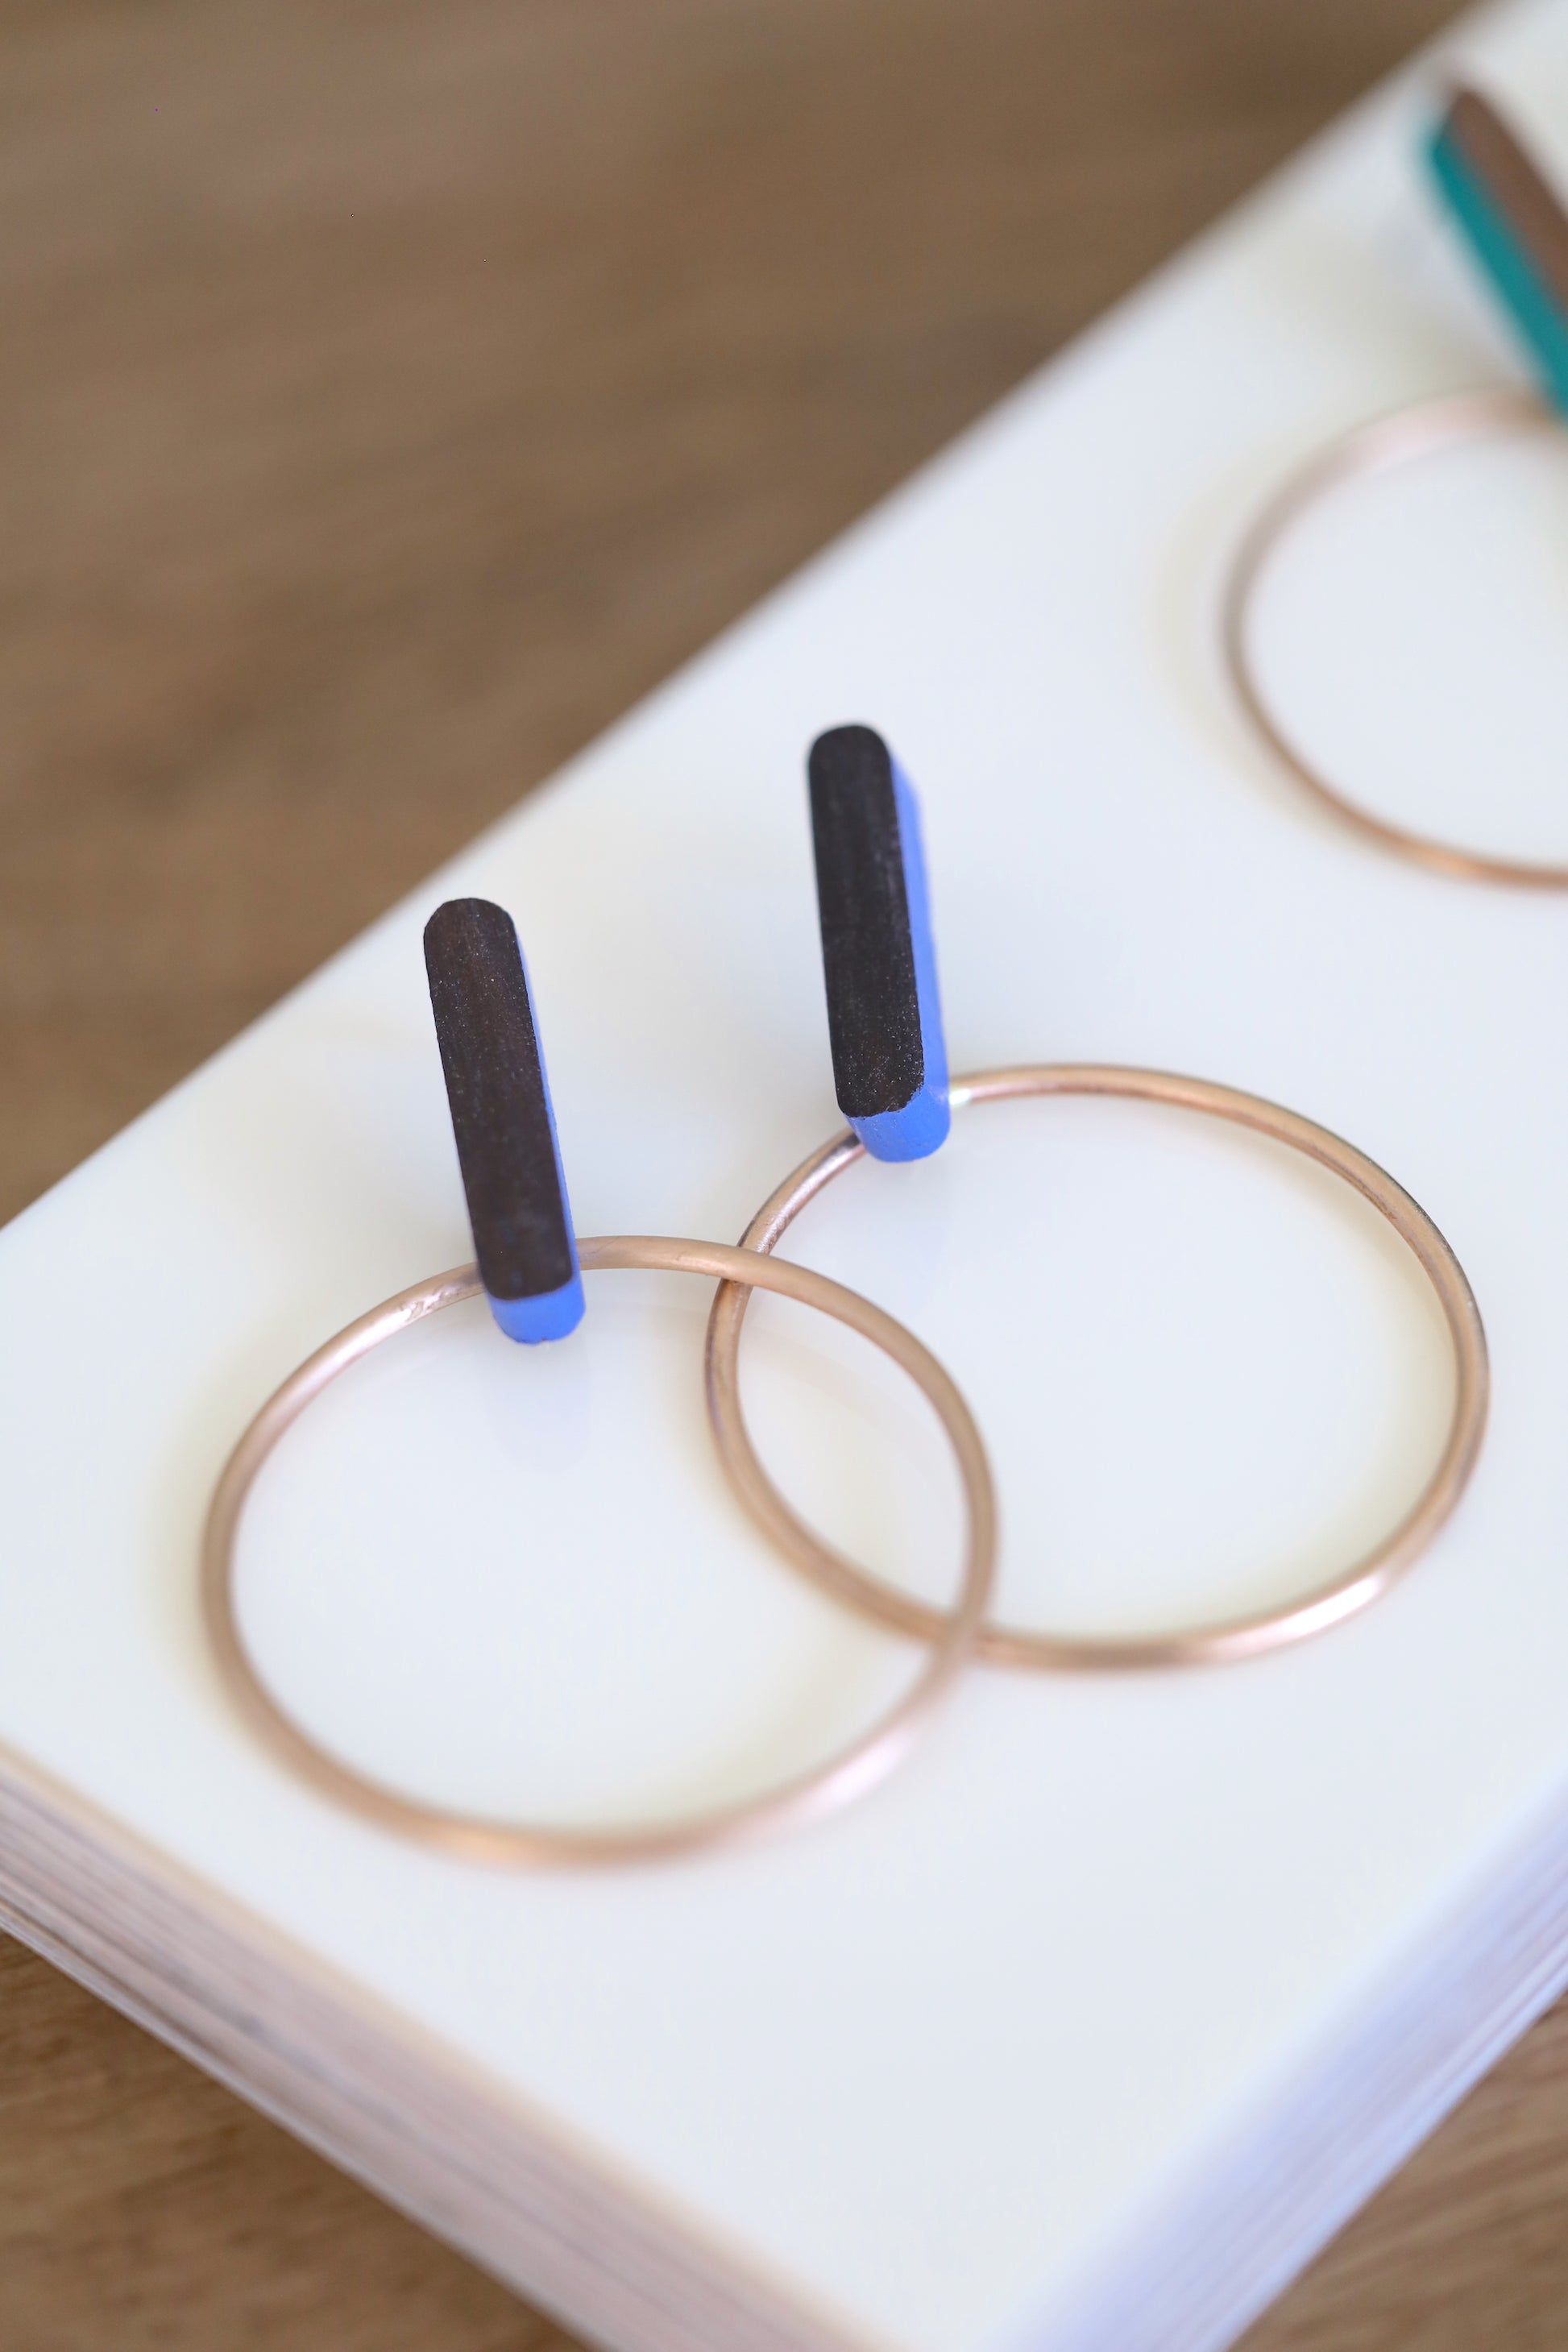 Earrings made of wood with blue painted accents and bronze hoops.